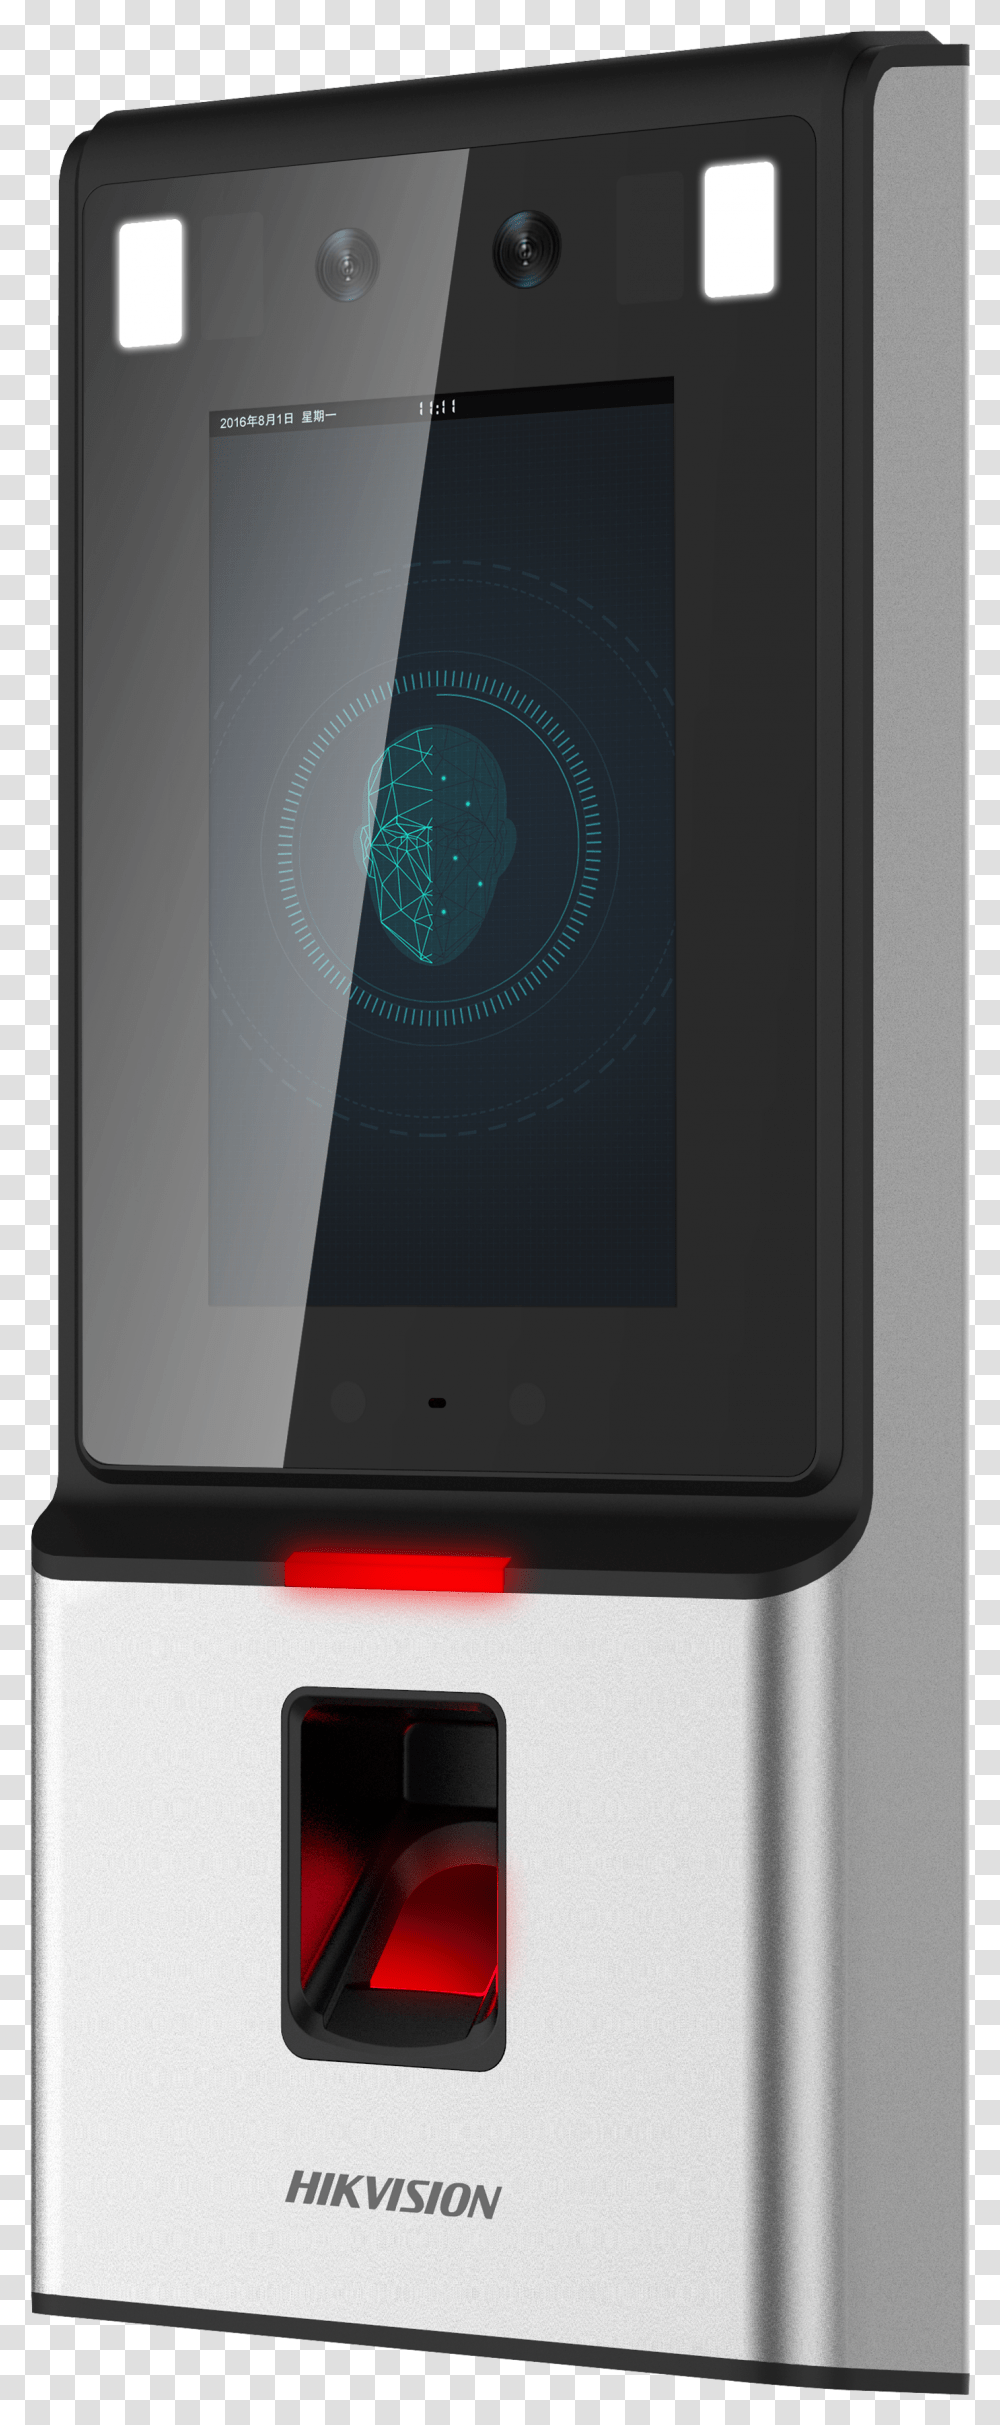 Hikvision Face Recognition Terminal, Mobile Phone, Electronics, Cell Phone, Iphone Transparent Png